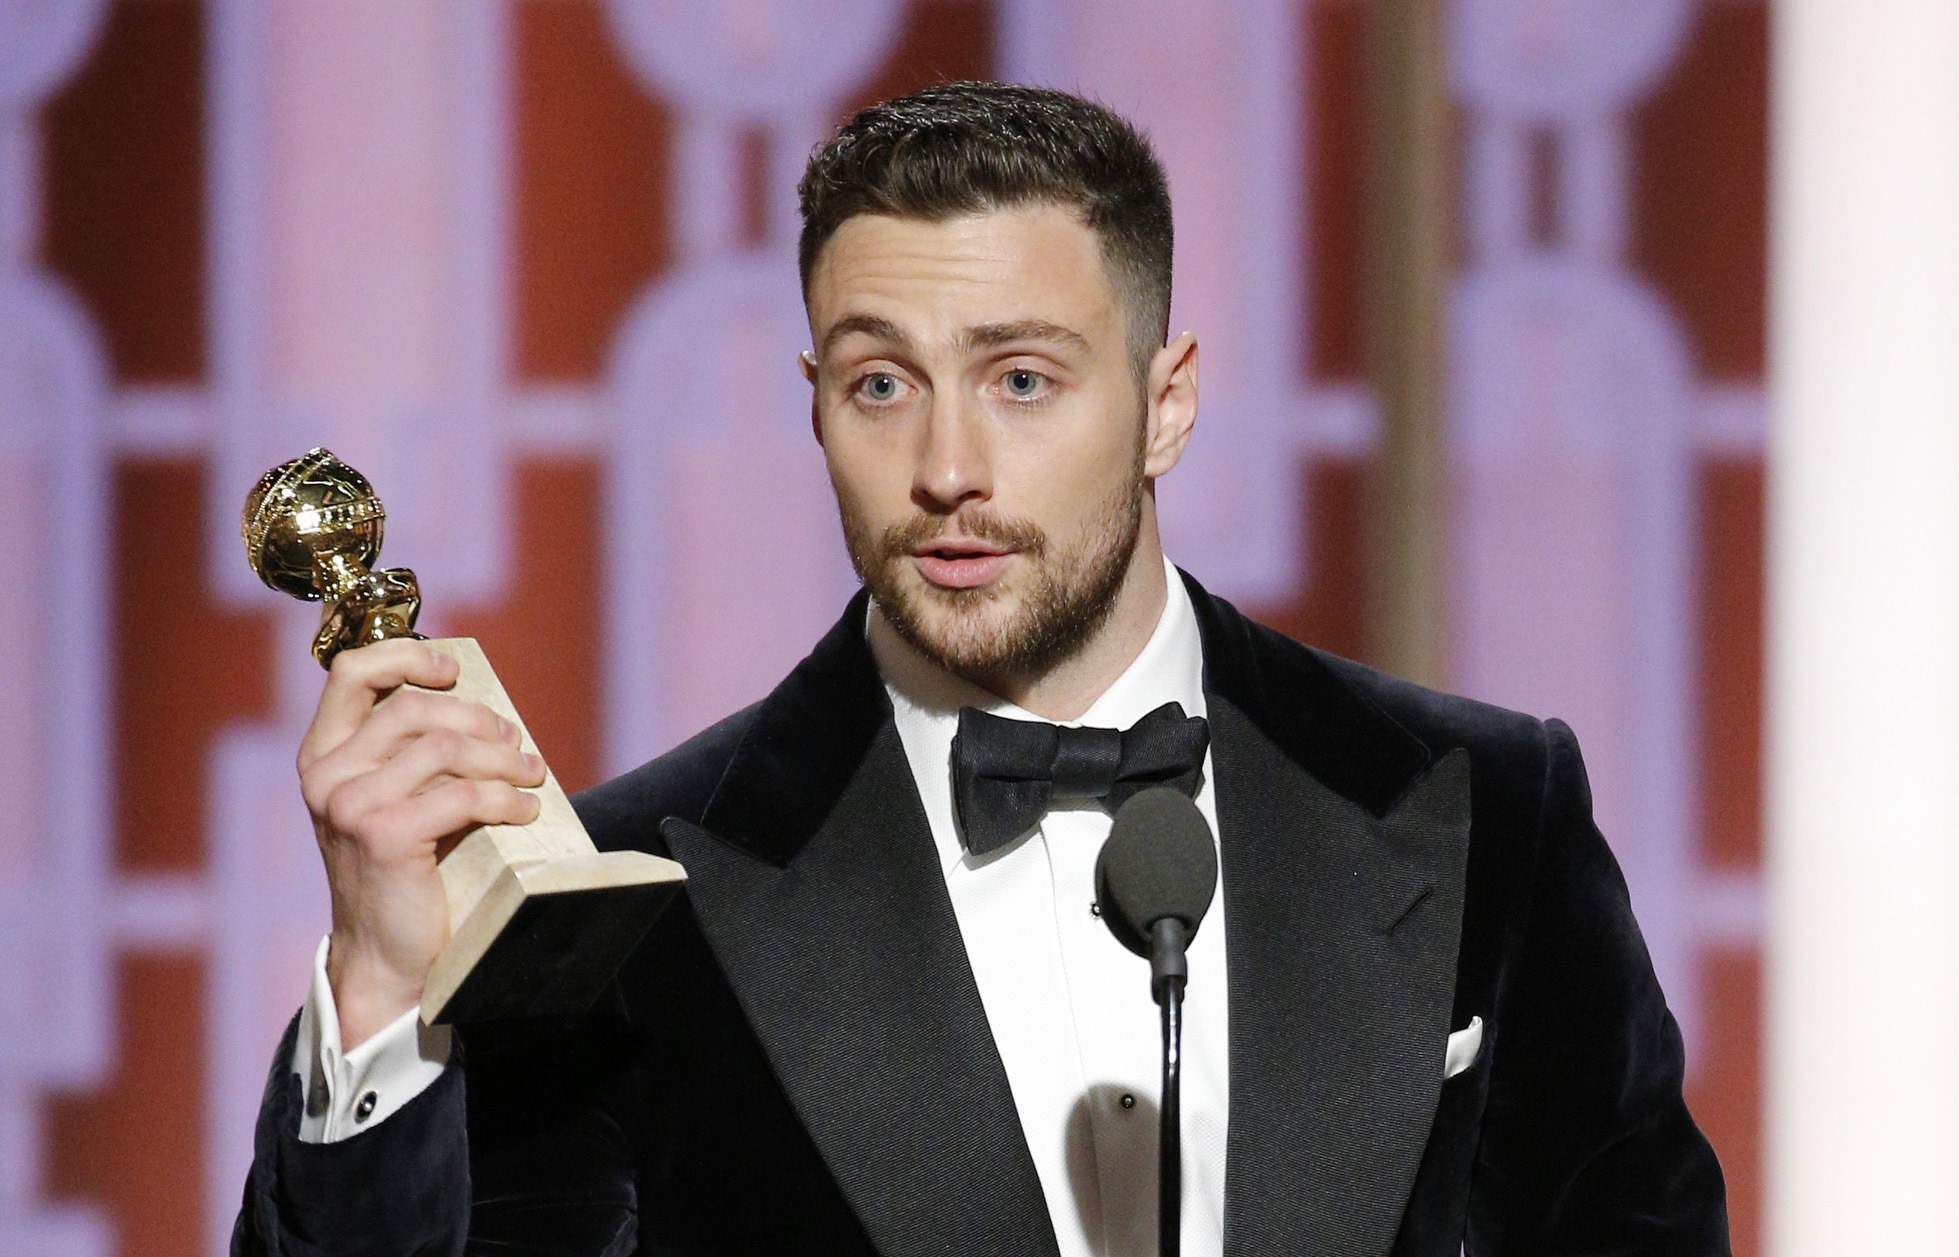 Aaron Taylor-Johnson at the Golden Globe awards in Los Angeles in 2017 | Source: Getty Images